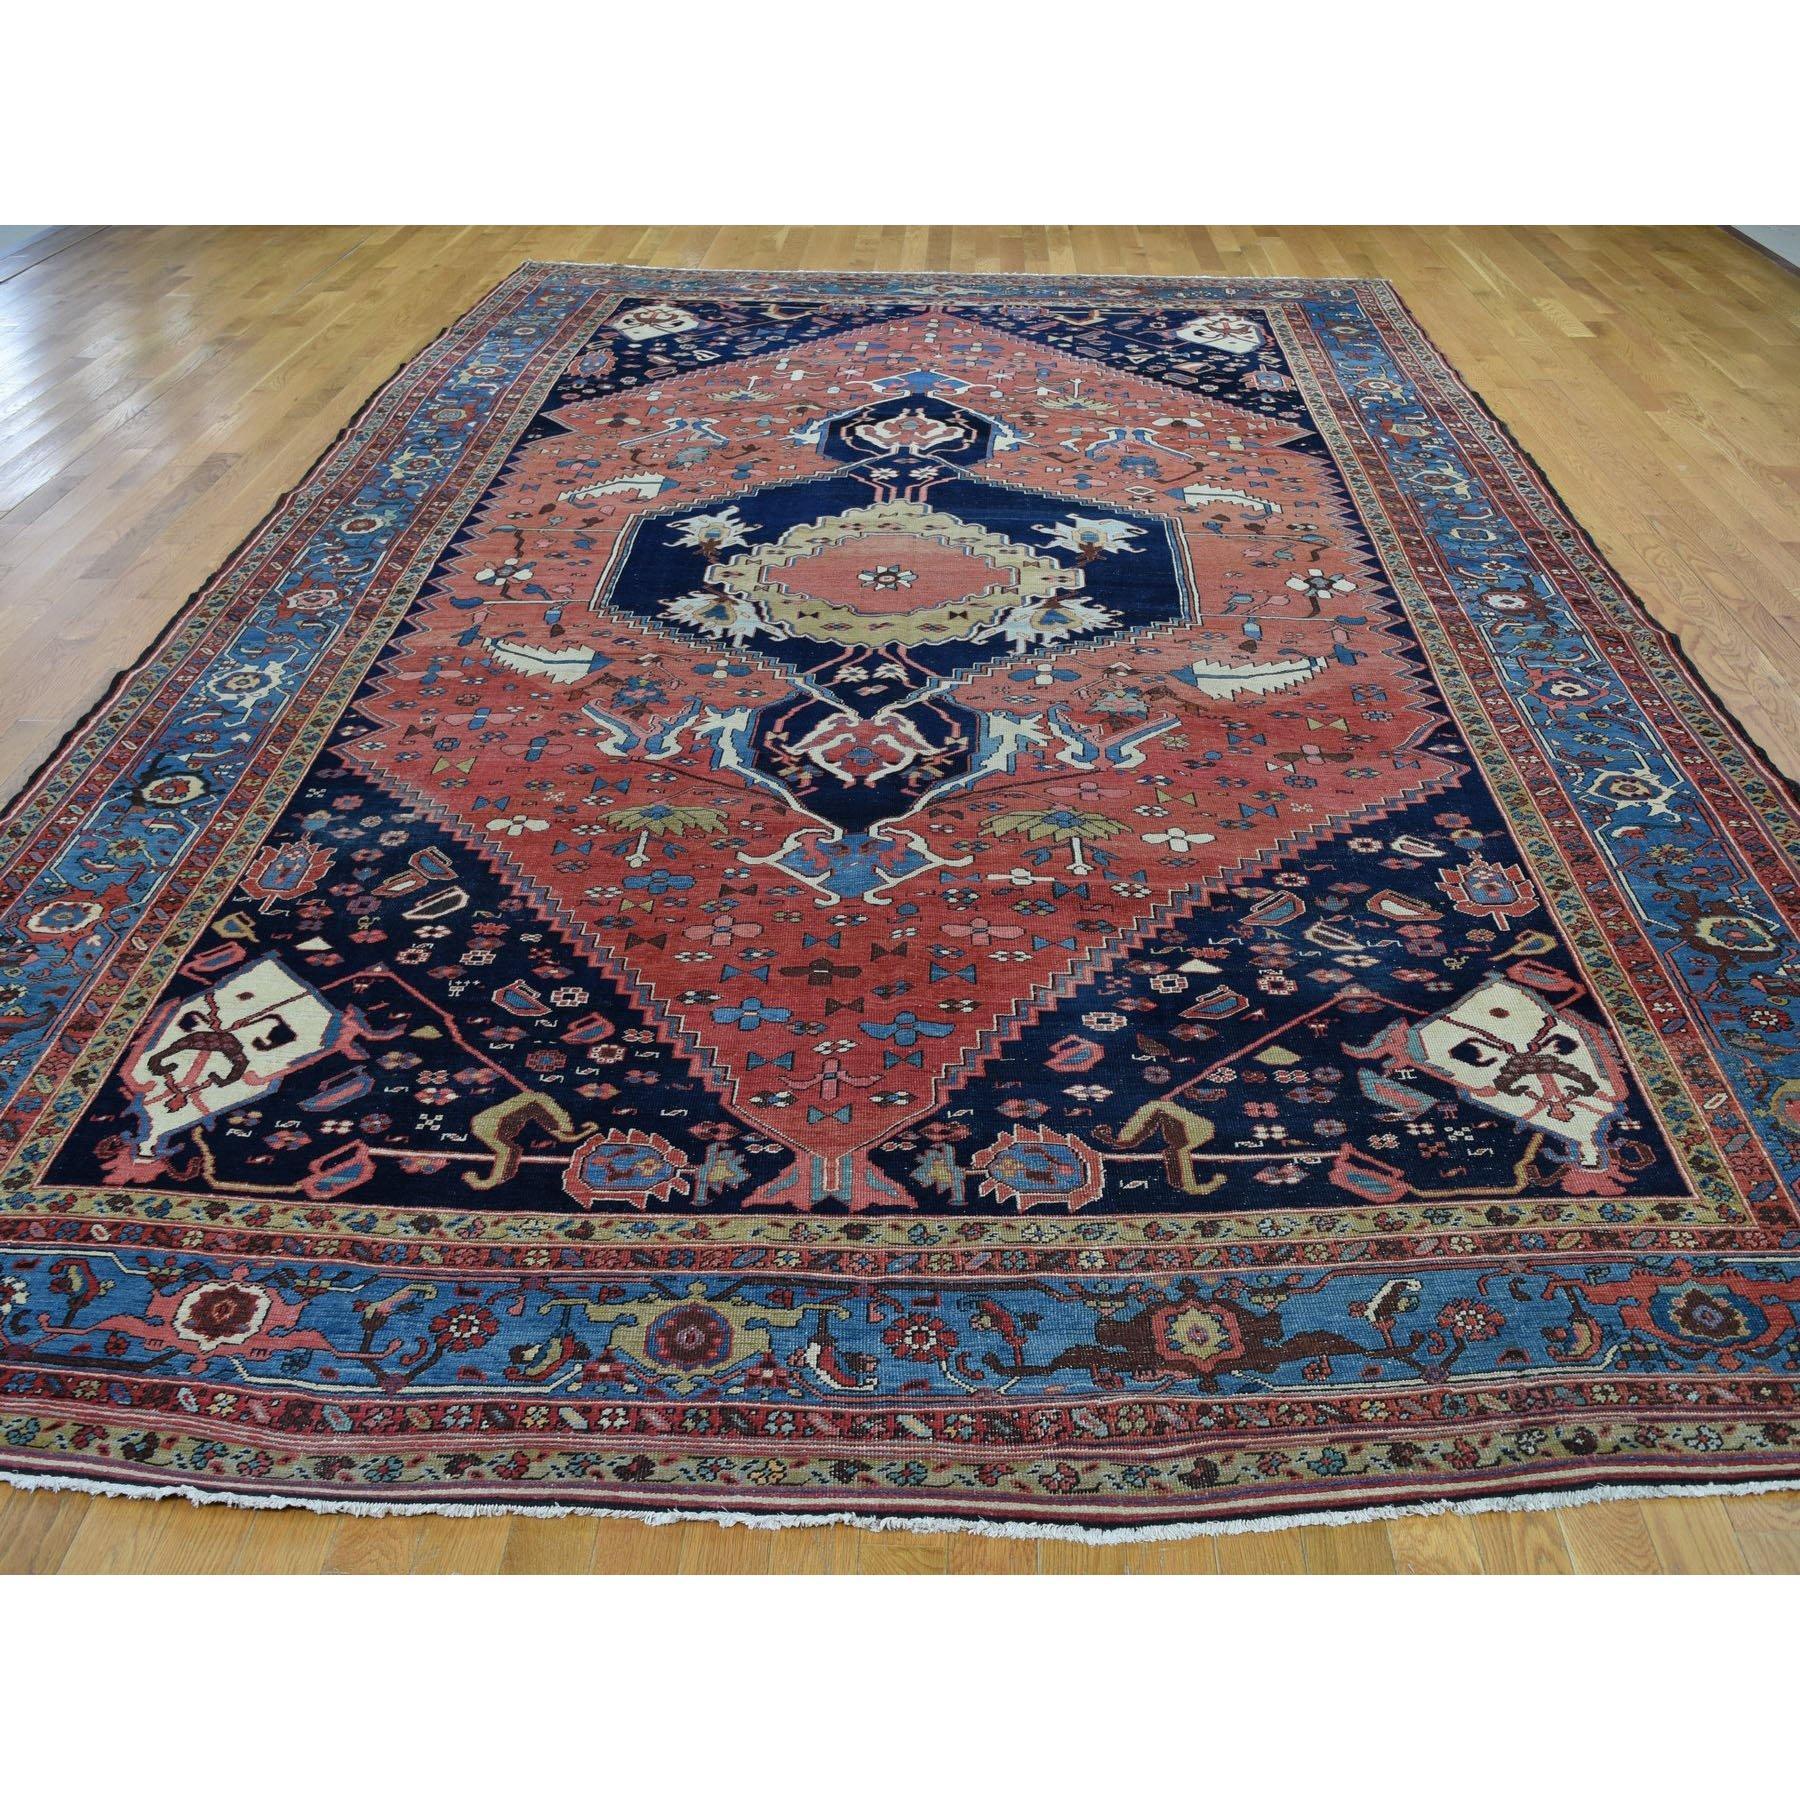 This is a truly genuine one-of-a-kind red antique Persian Sarouk pure wool full pile hand knotted rug. It has been knotted for months and months in the centuries-old Persian weaving craftsmanship techniques by expert artisans. 


Primary materials: